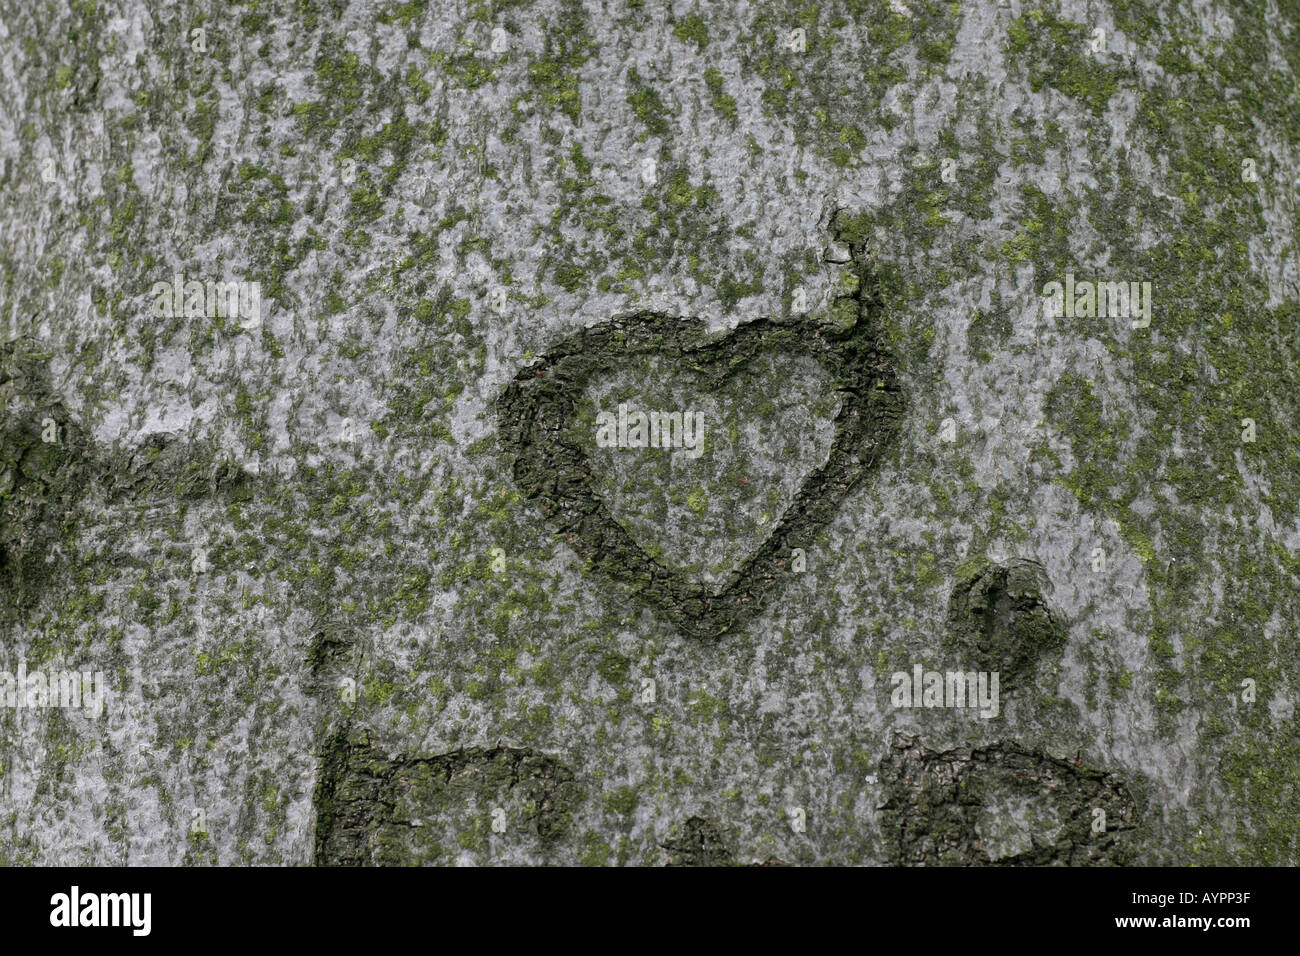 A carved heart shape seen on a trunk of a tree Stock Photo